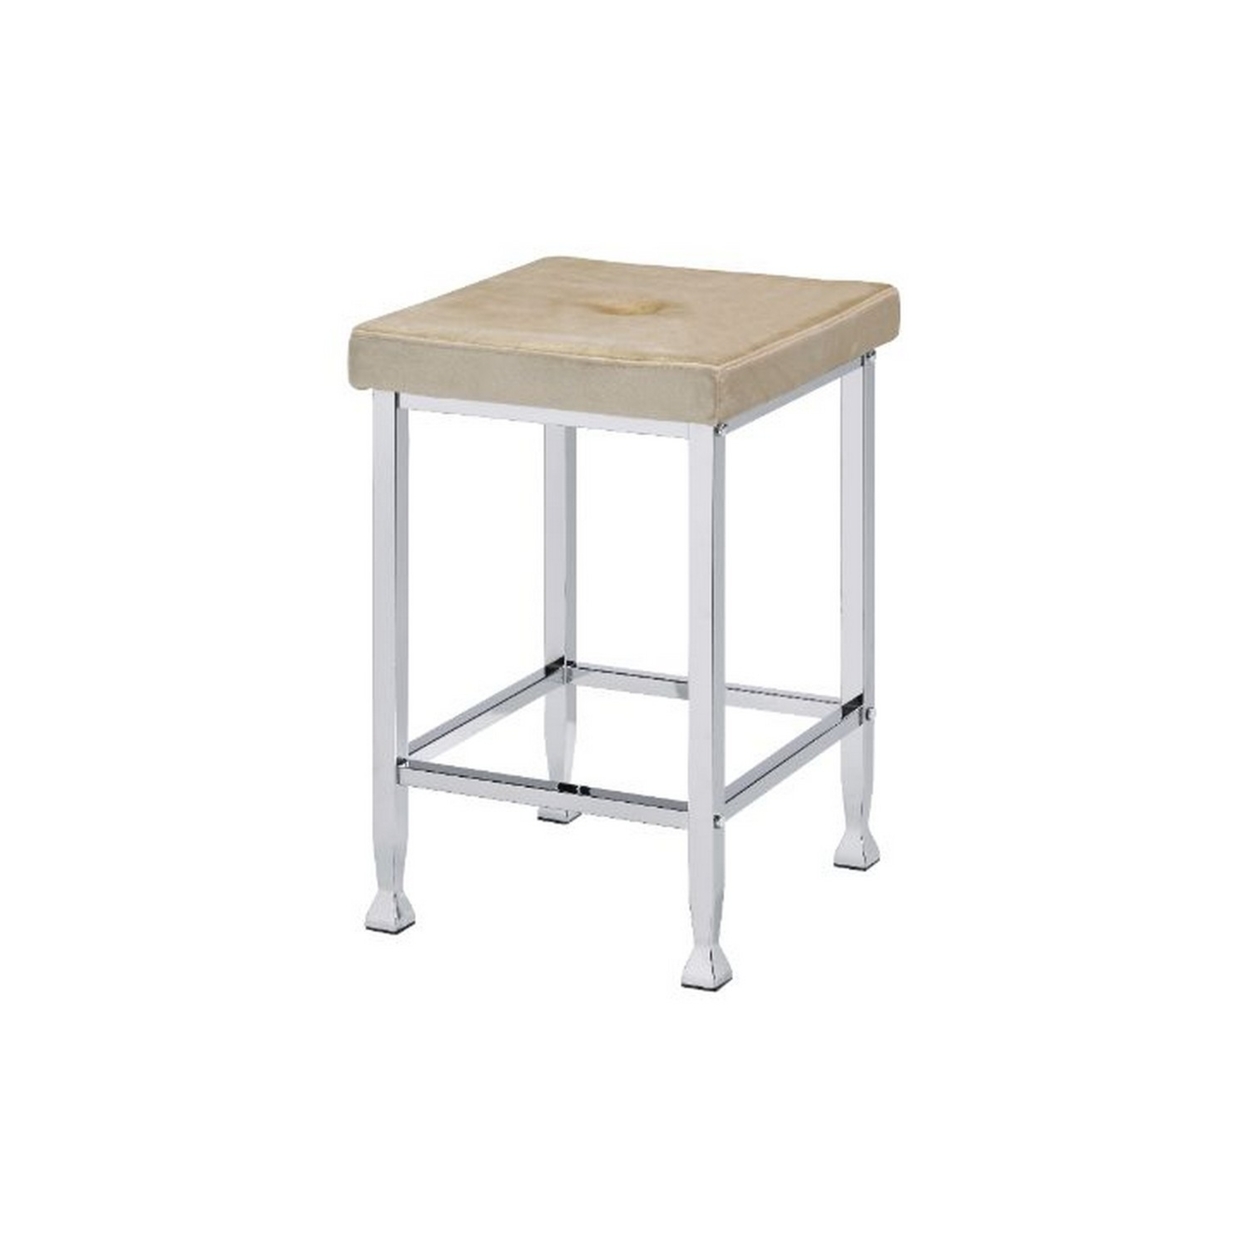 Counter Height Stool With Padded Seat And Metal Base, Beige- Saltoro Sherpi